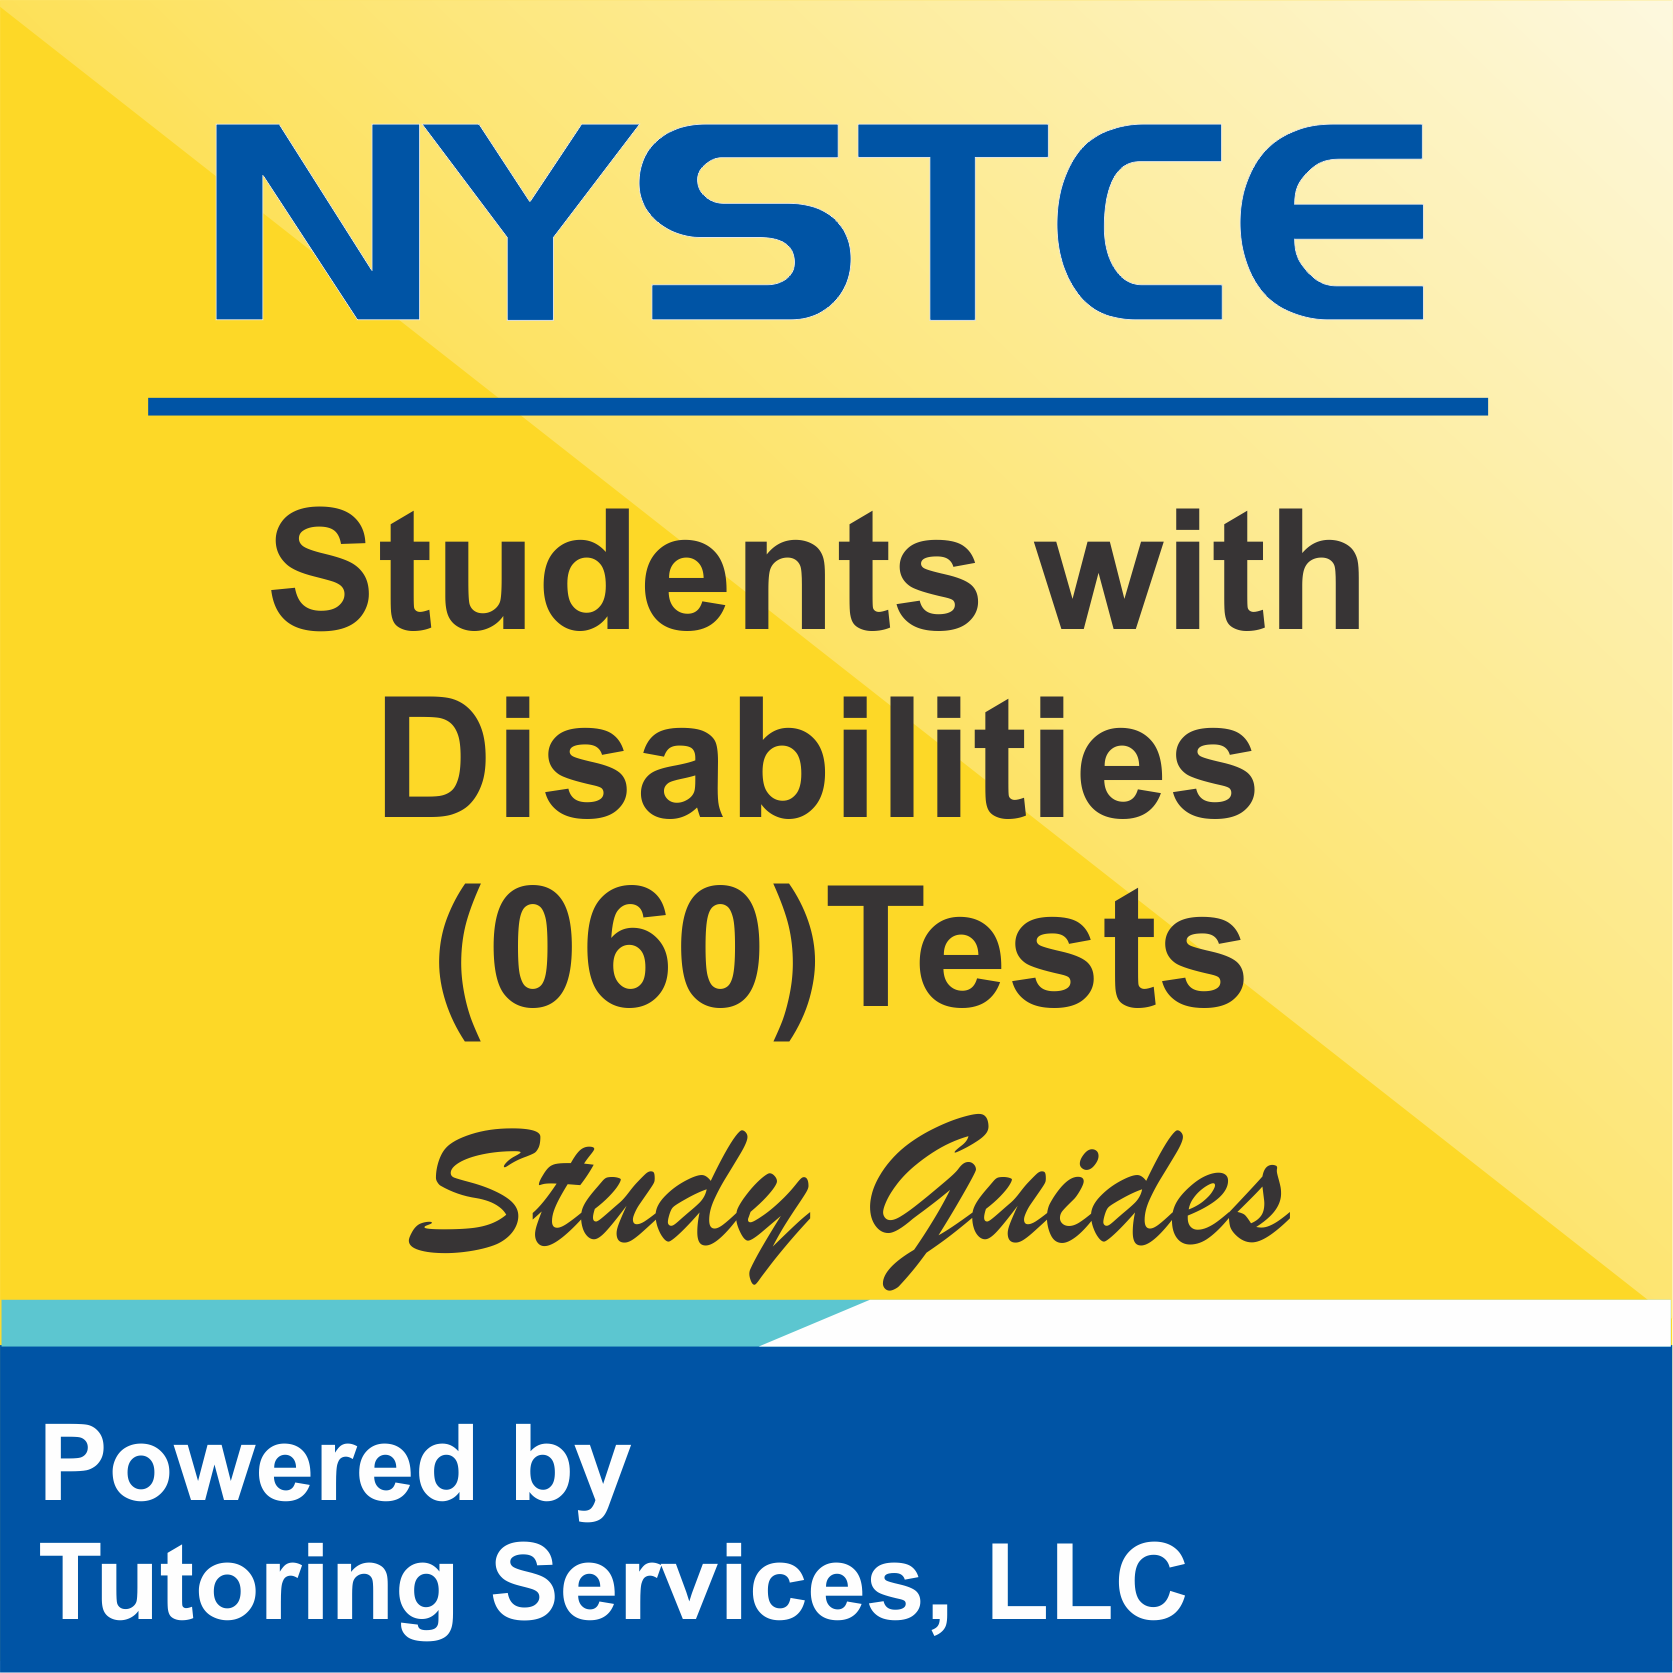 NYSTCE Licensure Test Facts for Students with Disabilities 060